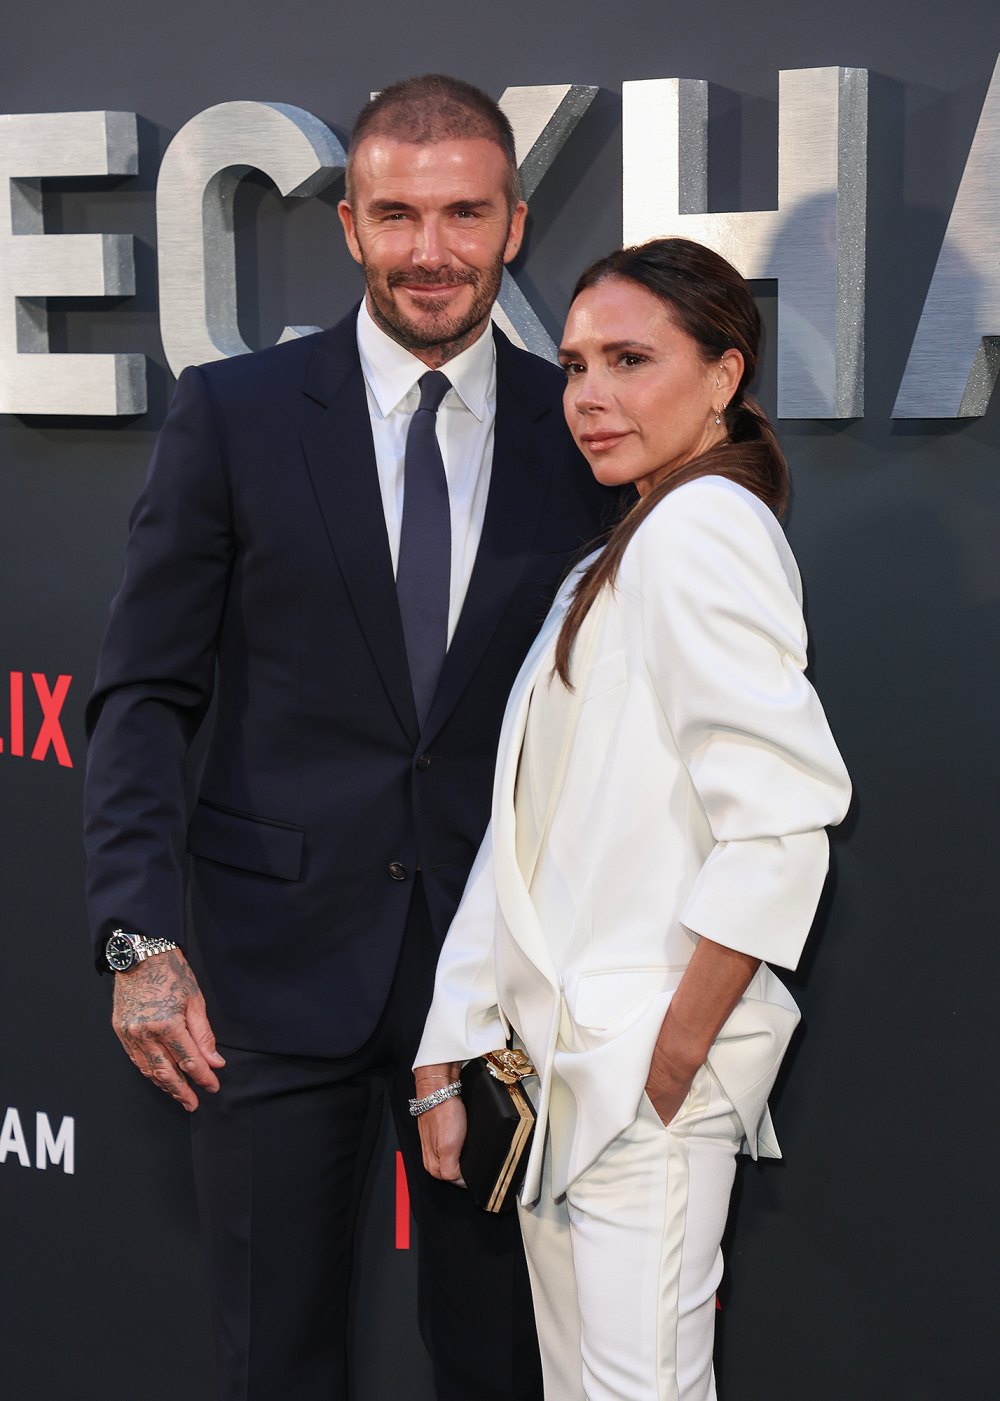 David and Victoria Beckham Rock Their Iconic Purple Wedding Outfits in Honor of 25th Anniversary